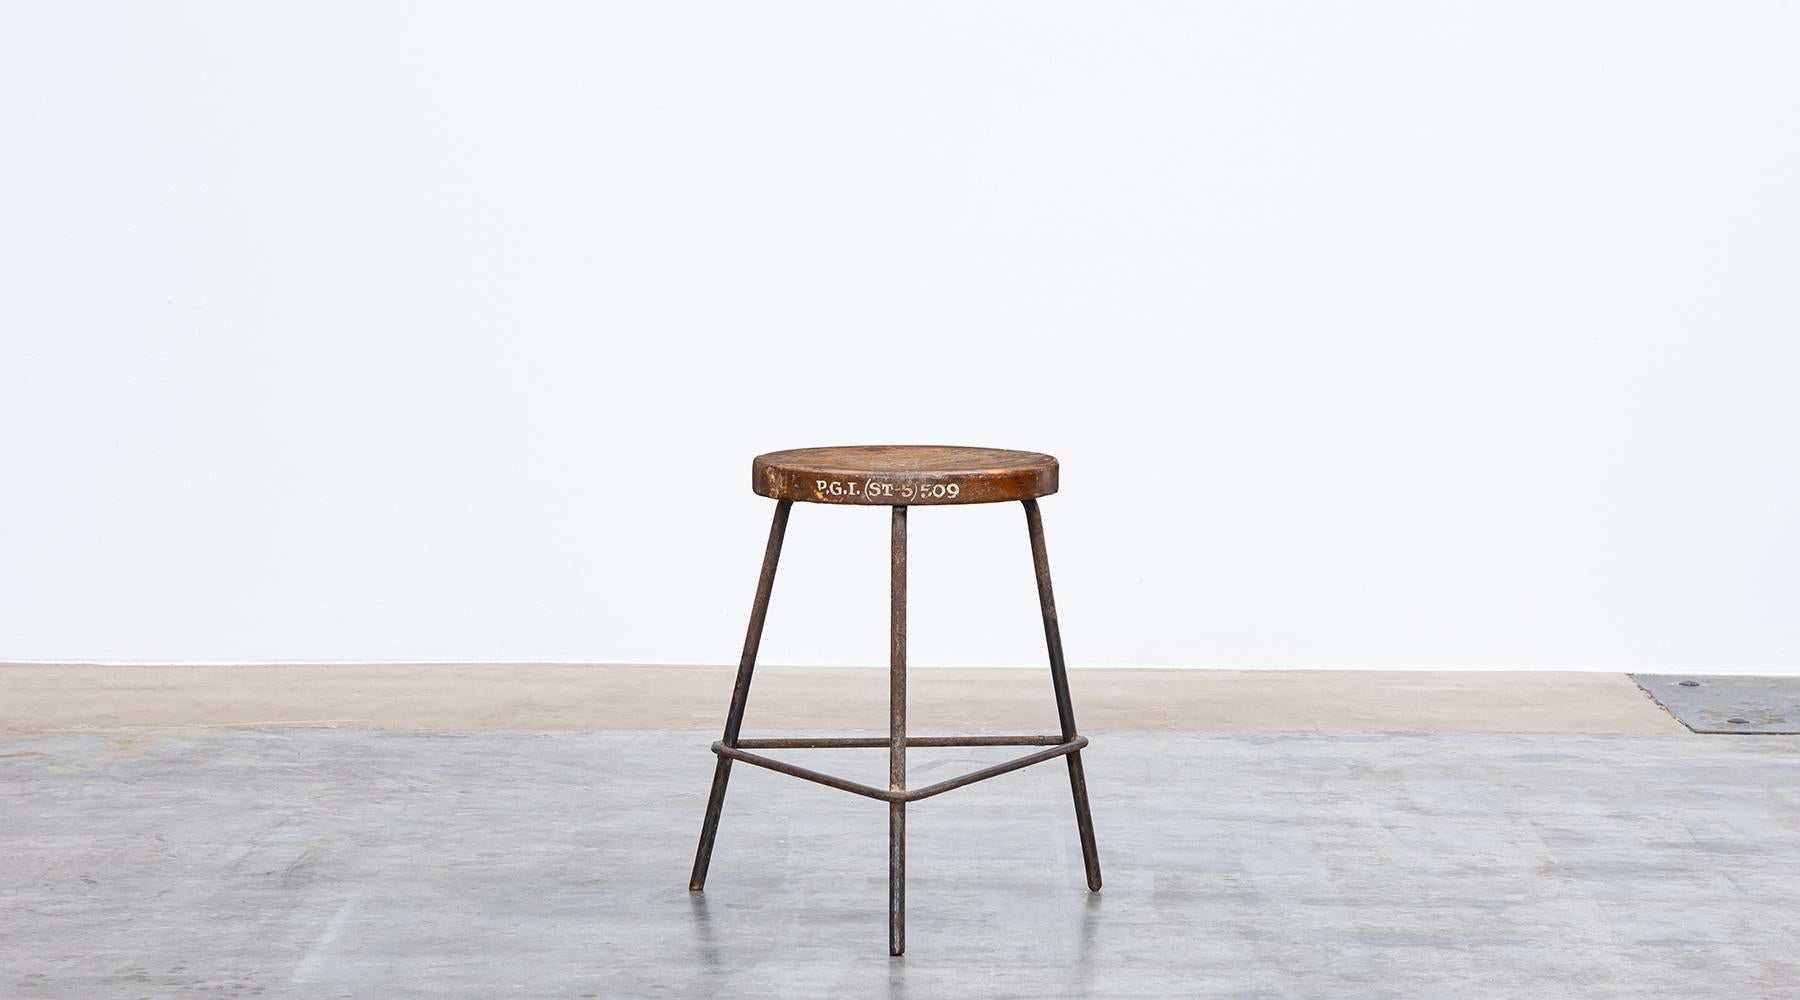 Stool designed by Pierre Jeanneret, wood and metal, Chandigarh, India, 1955.

An original stool by Pierre Jeanneret from 1960. The wooden seat is marked on the side and comes on a three-legged metal construction. The stool definitely lives through